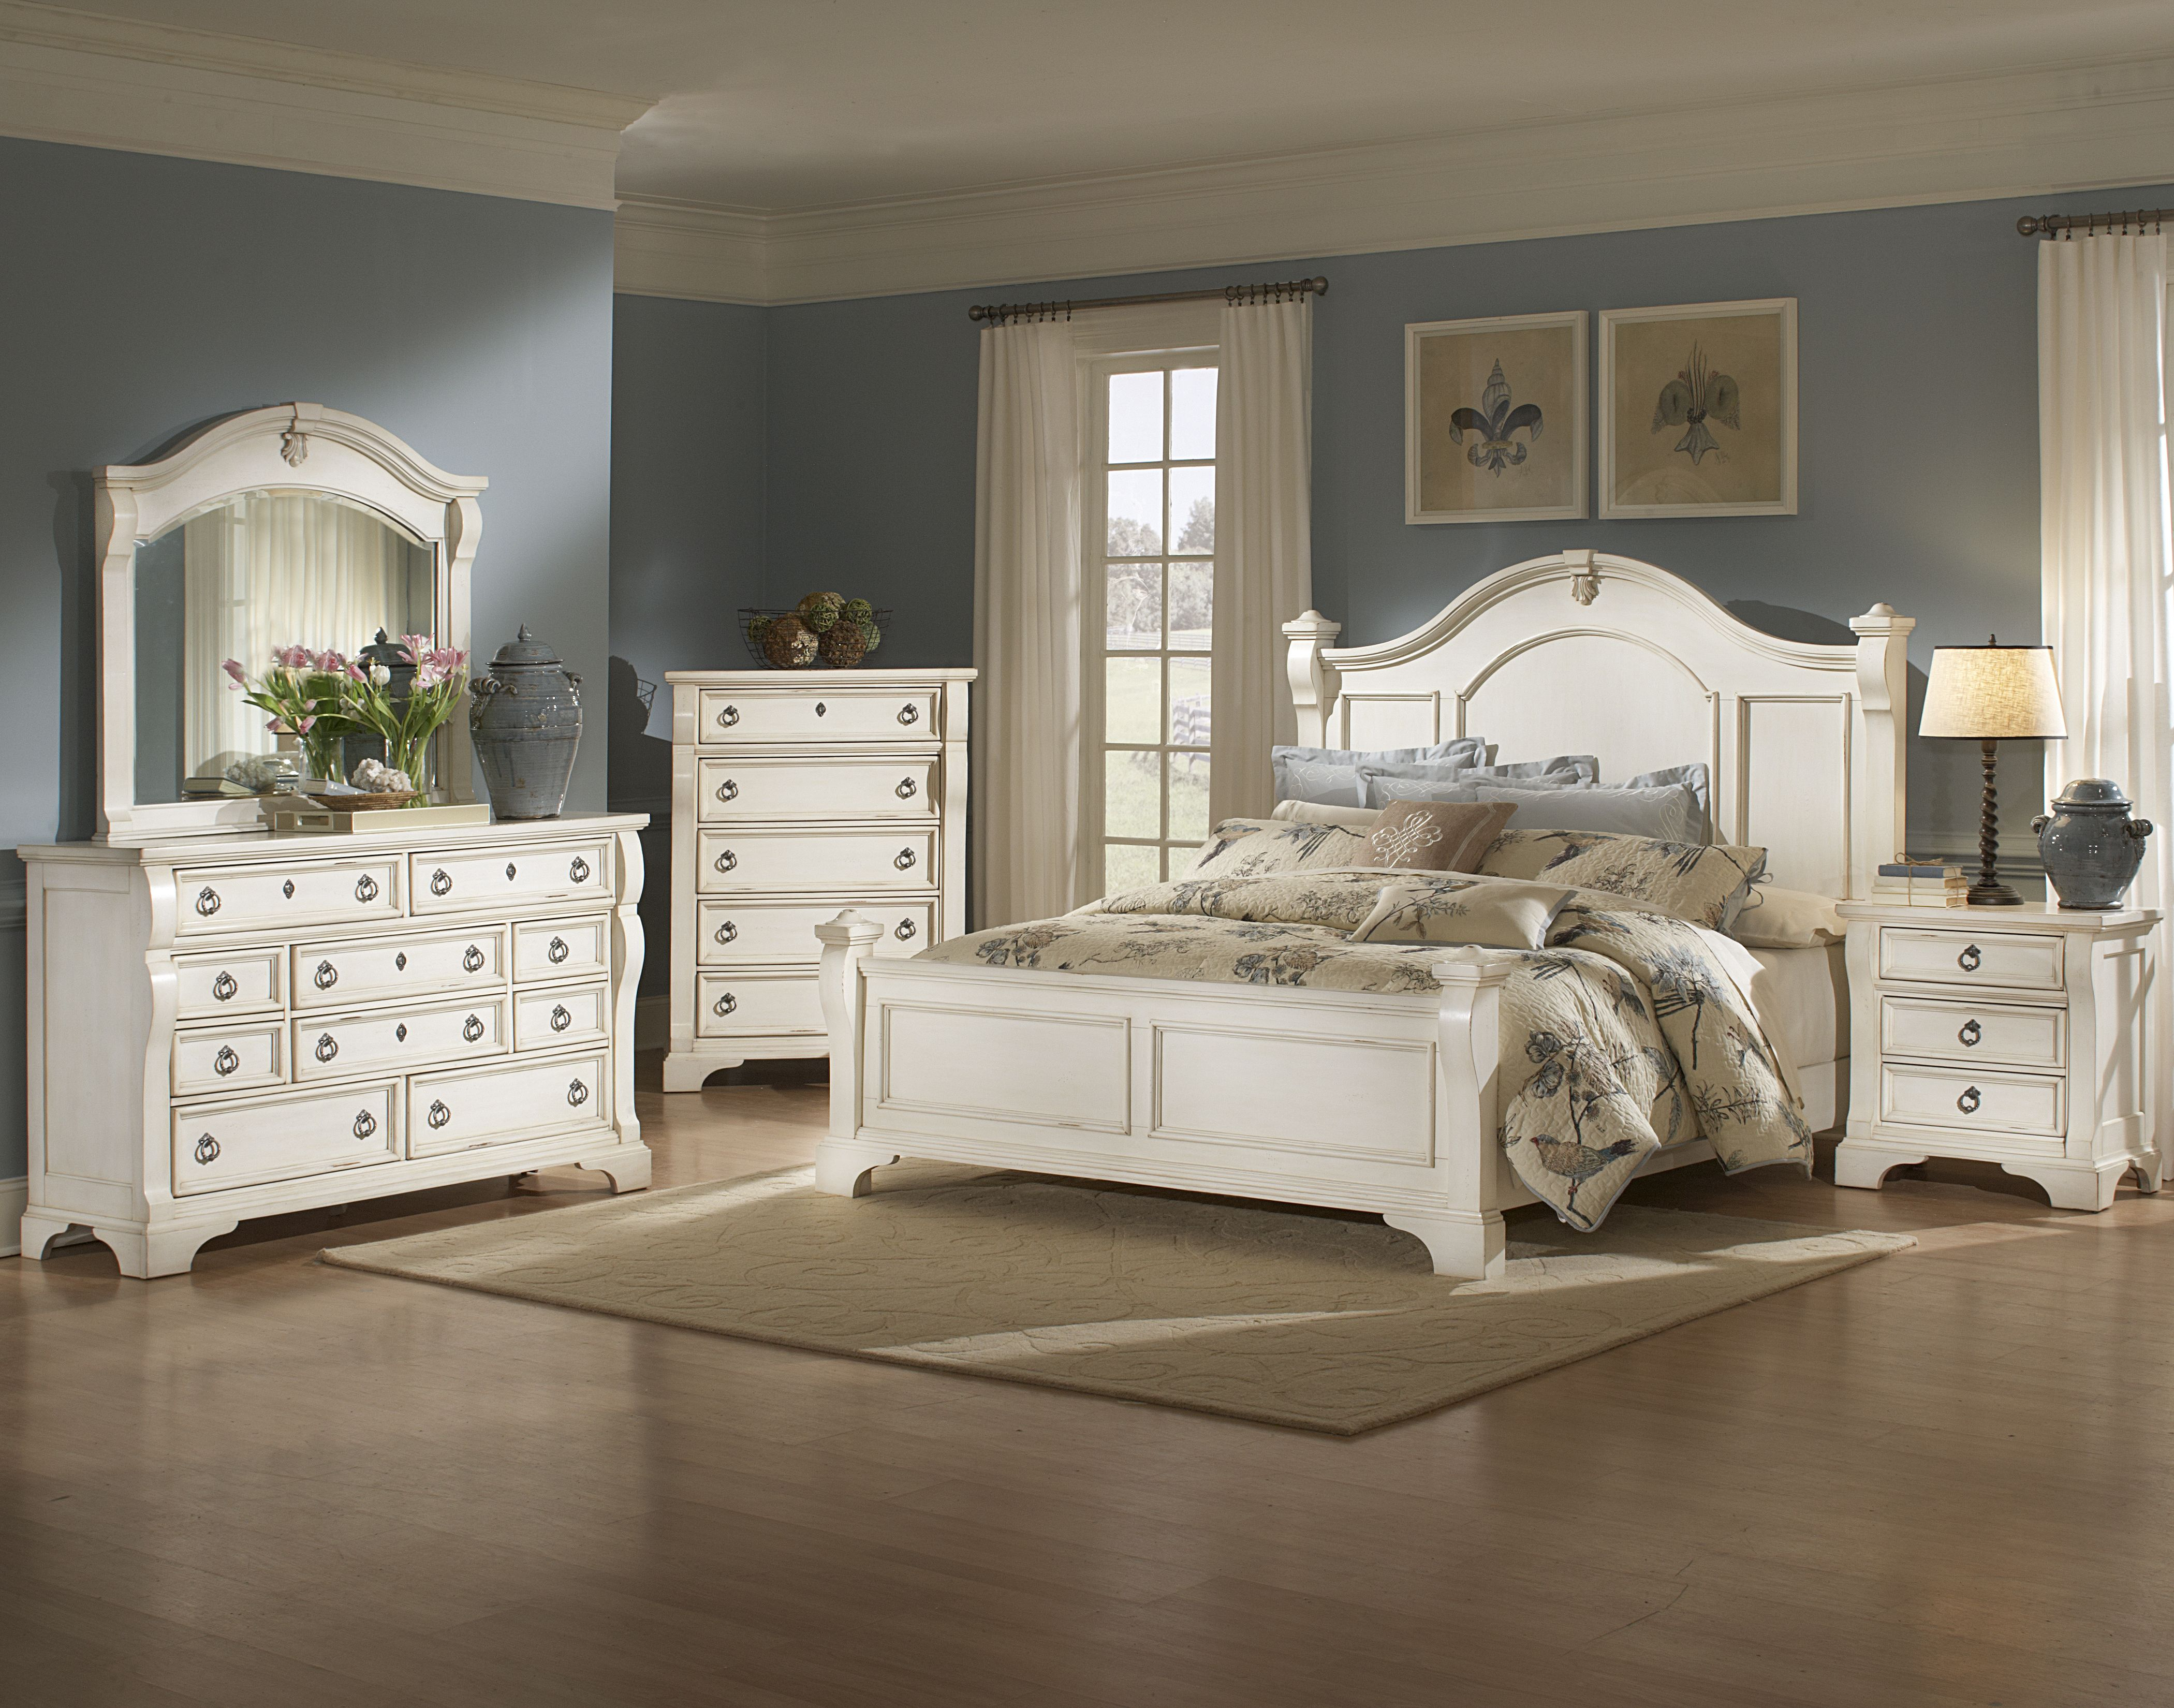 Bedroom Furniture Set White Bedrooms With Antique Must Do Soon inside measurements 4200 X 3300